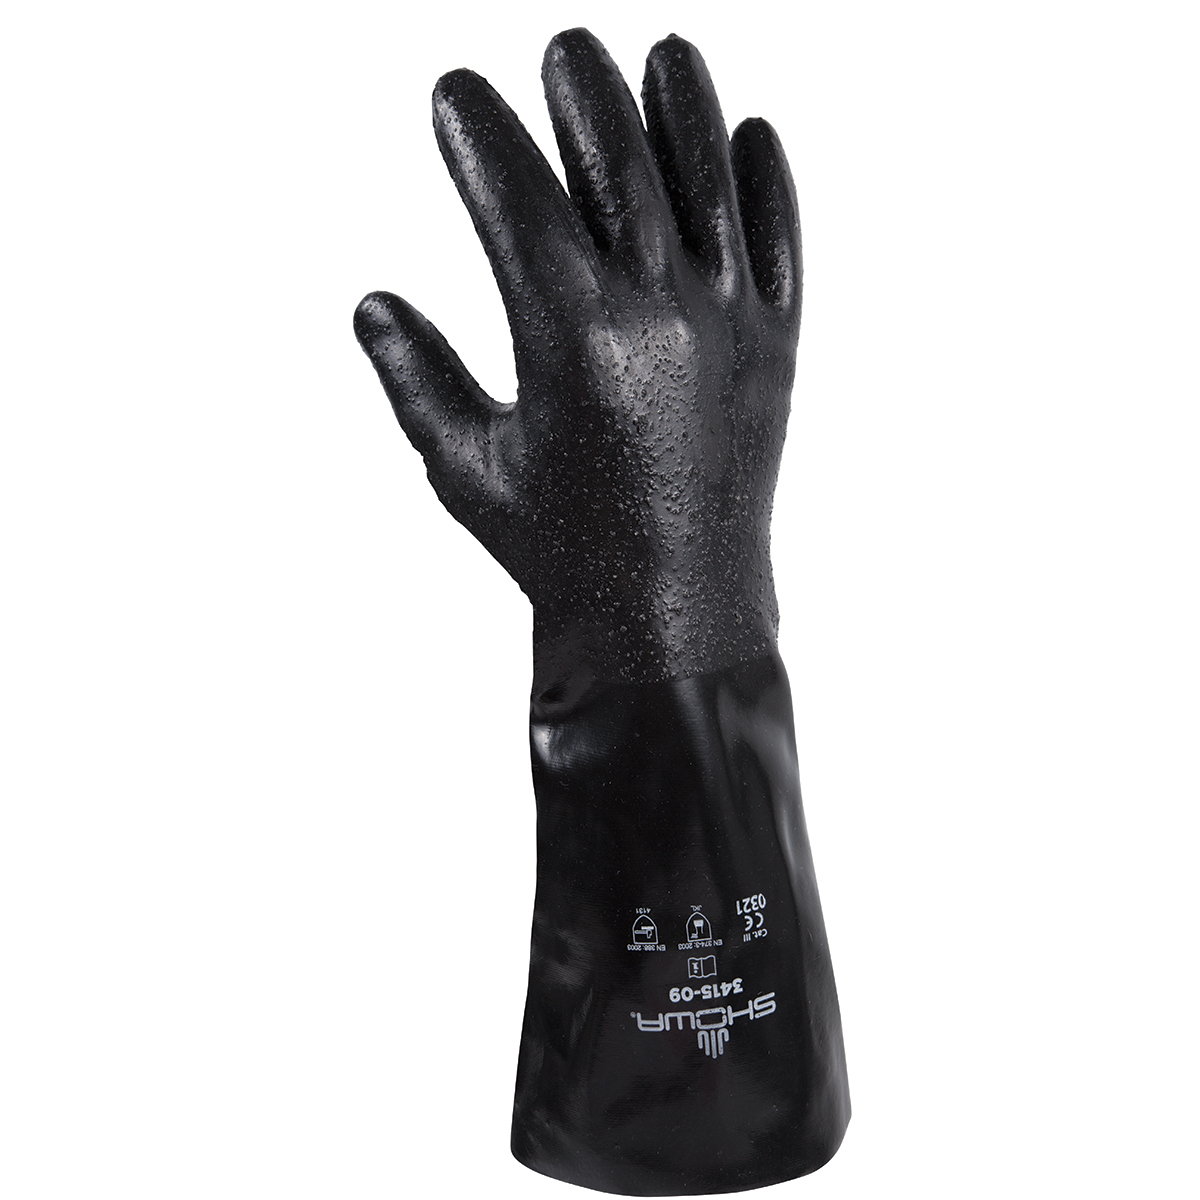 Chemical resistant neoprene, fully coated 14" gauntlet/rough finish, seamless liner, navy /small